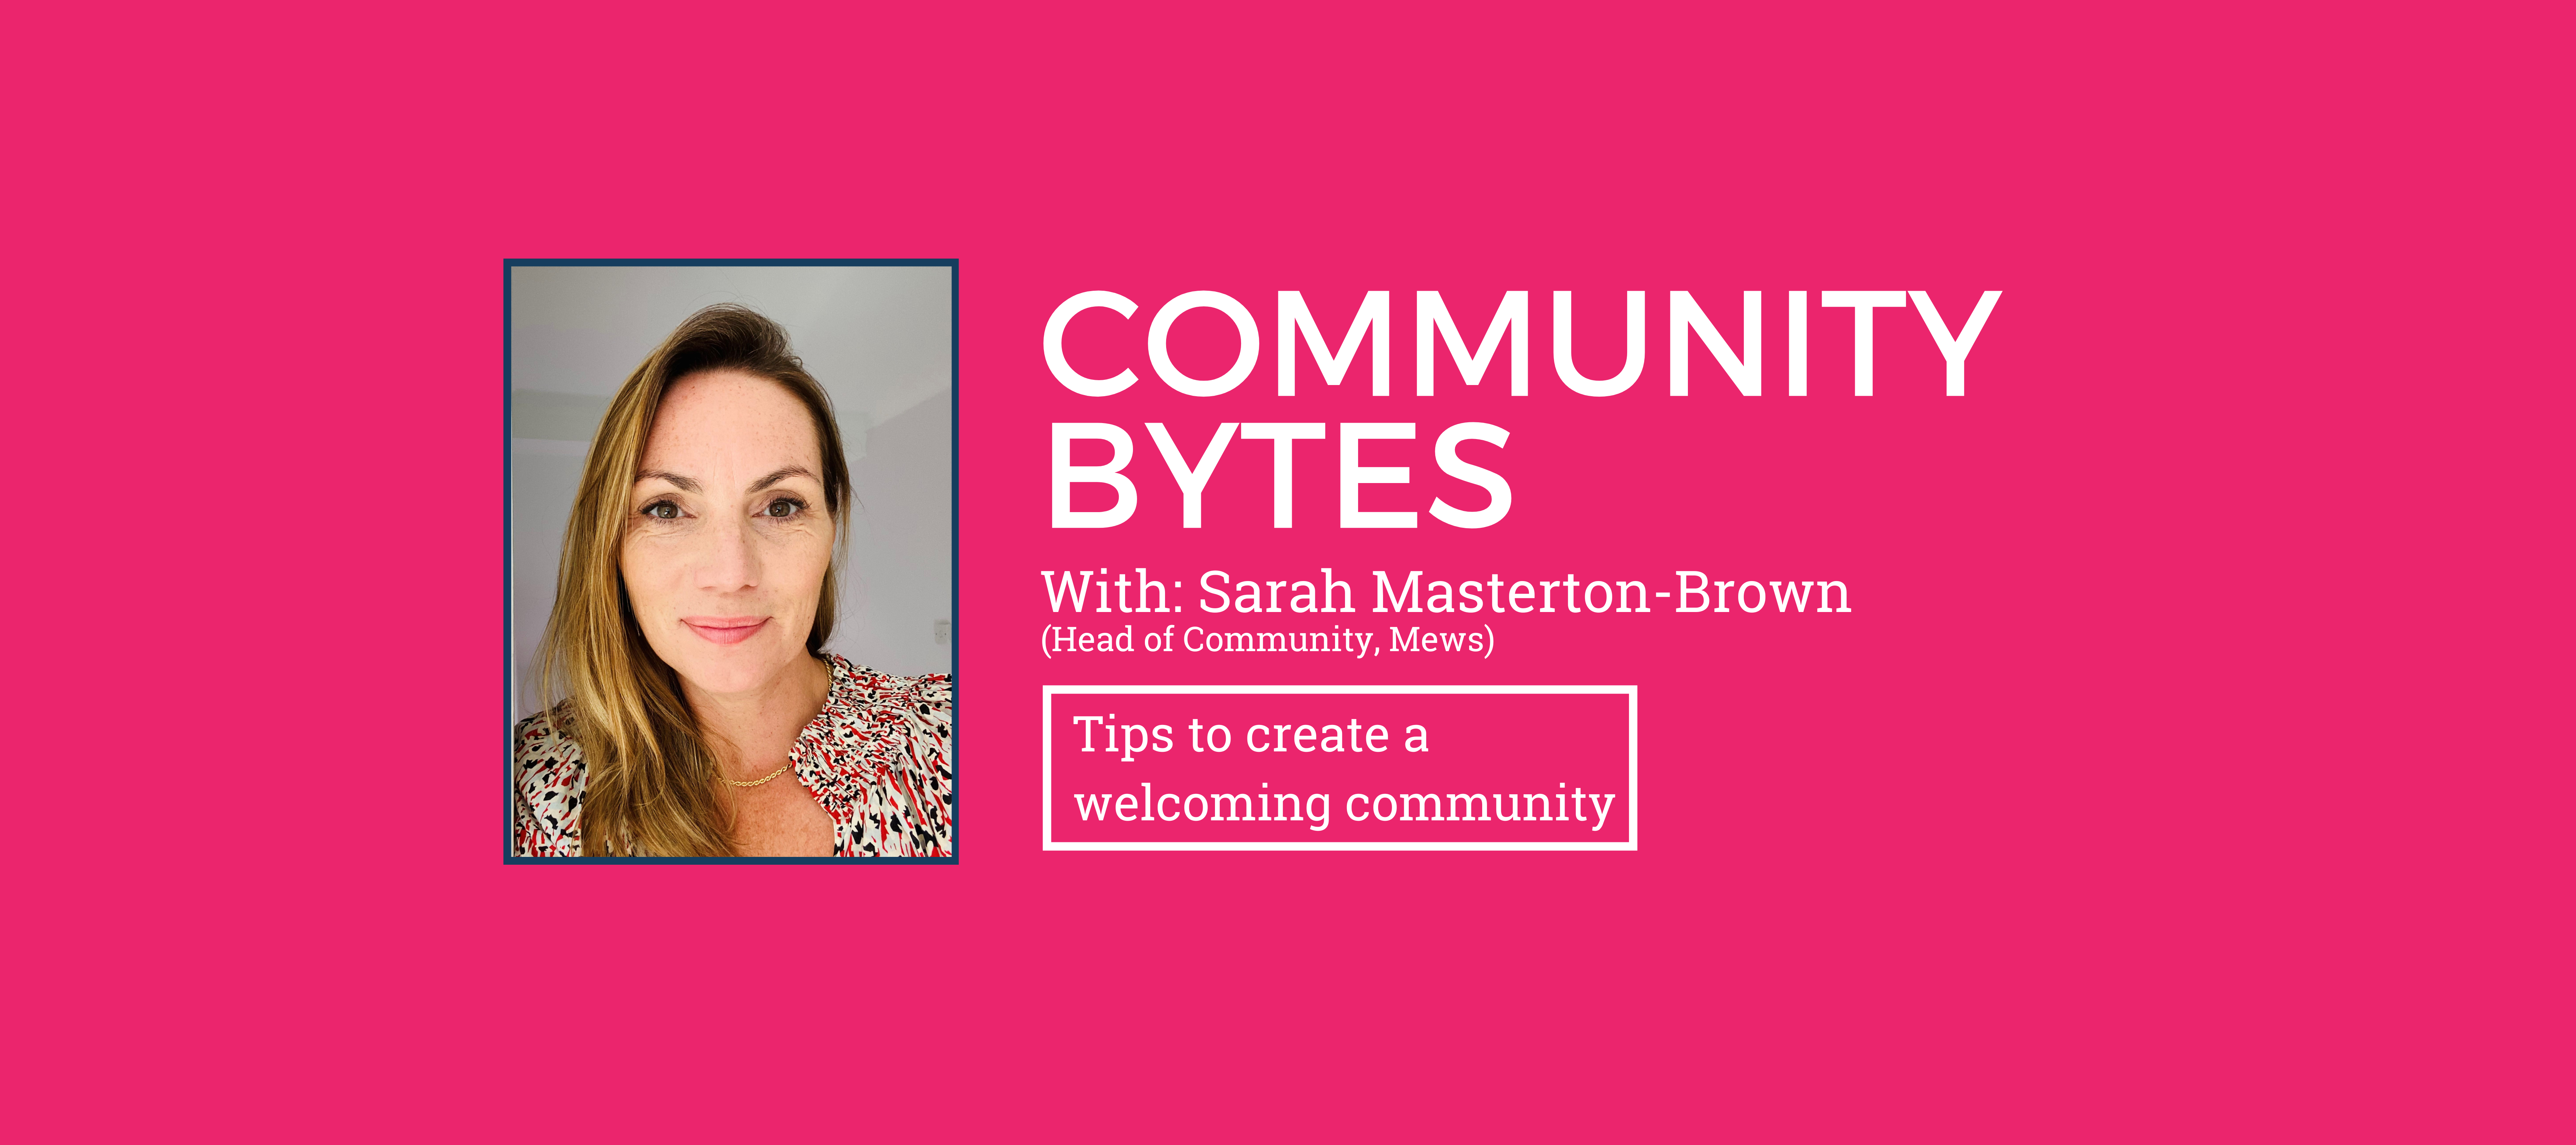 Community Bytes w/ Sarah Masterton-Brown: Tips to create a welcoming community